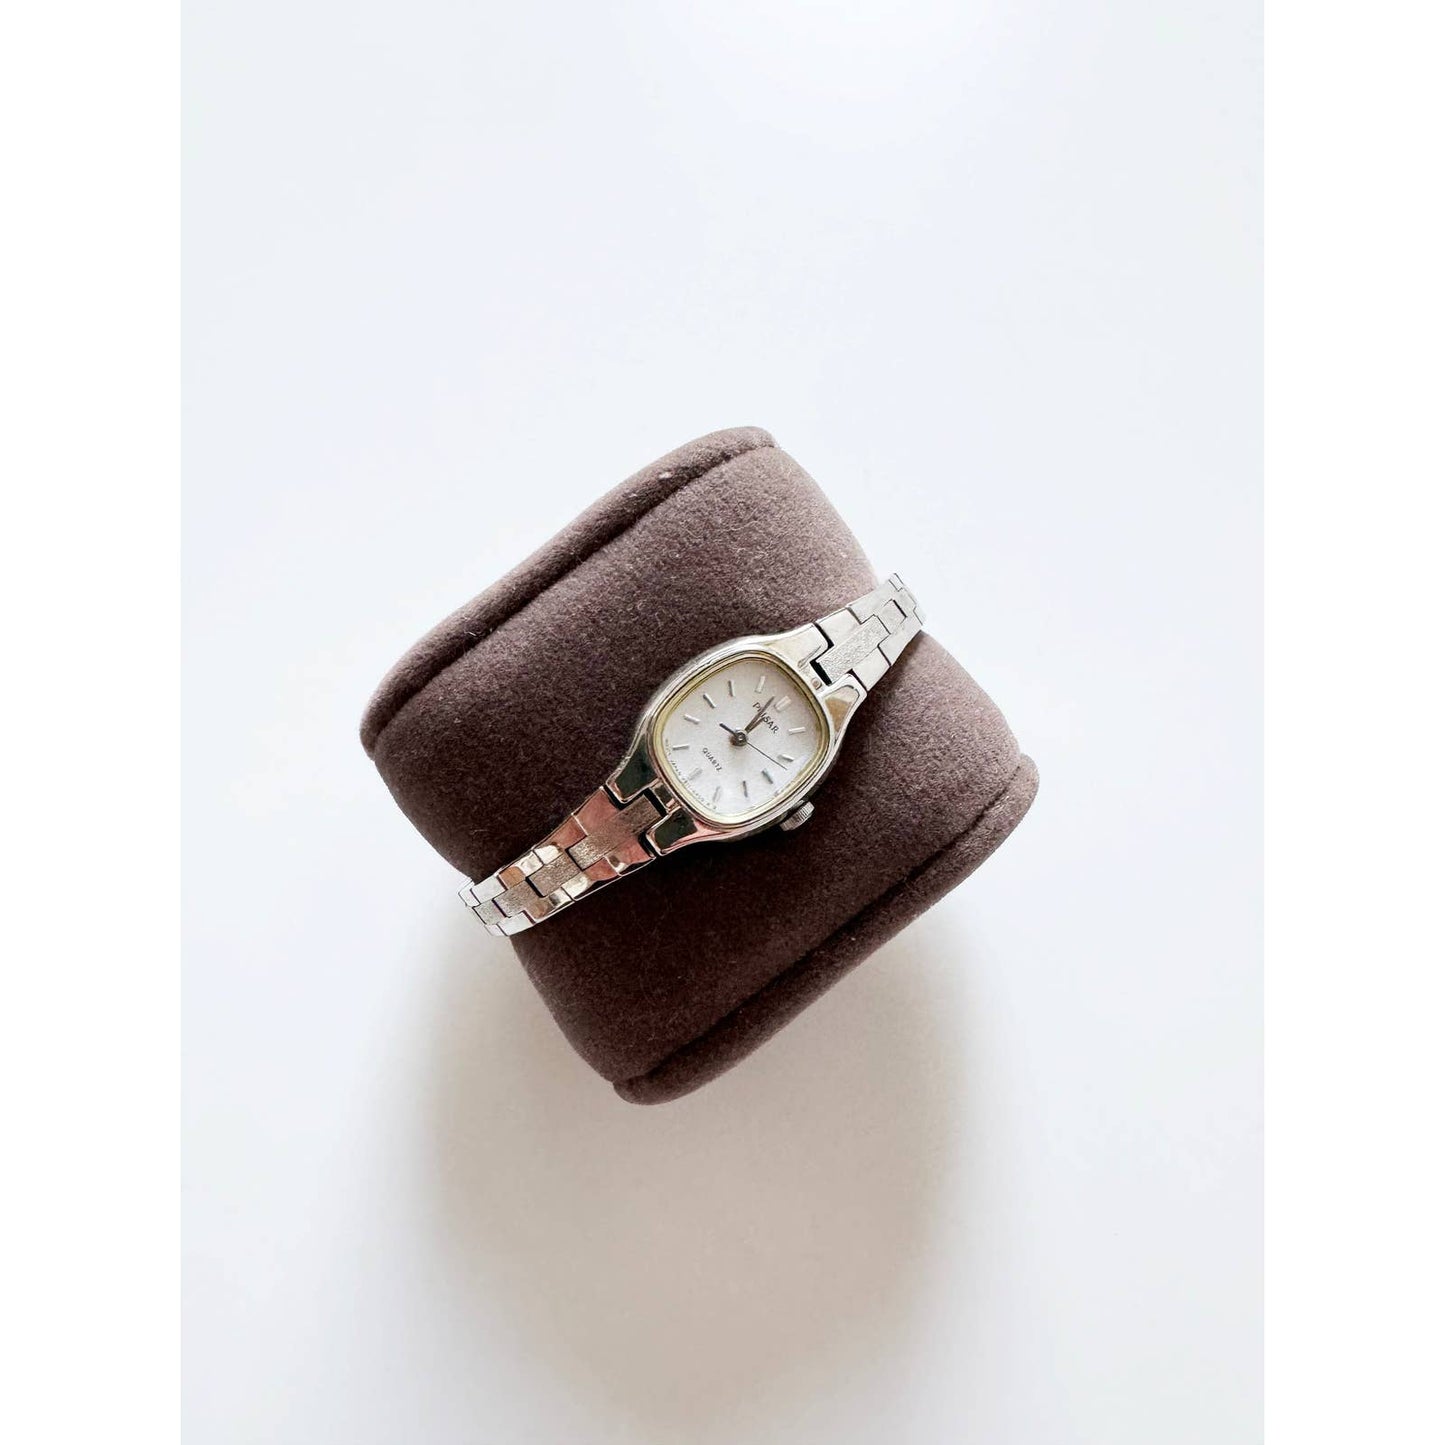 Vintage 90s Small Silver Watch with Square Face | Pulsar